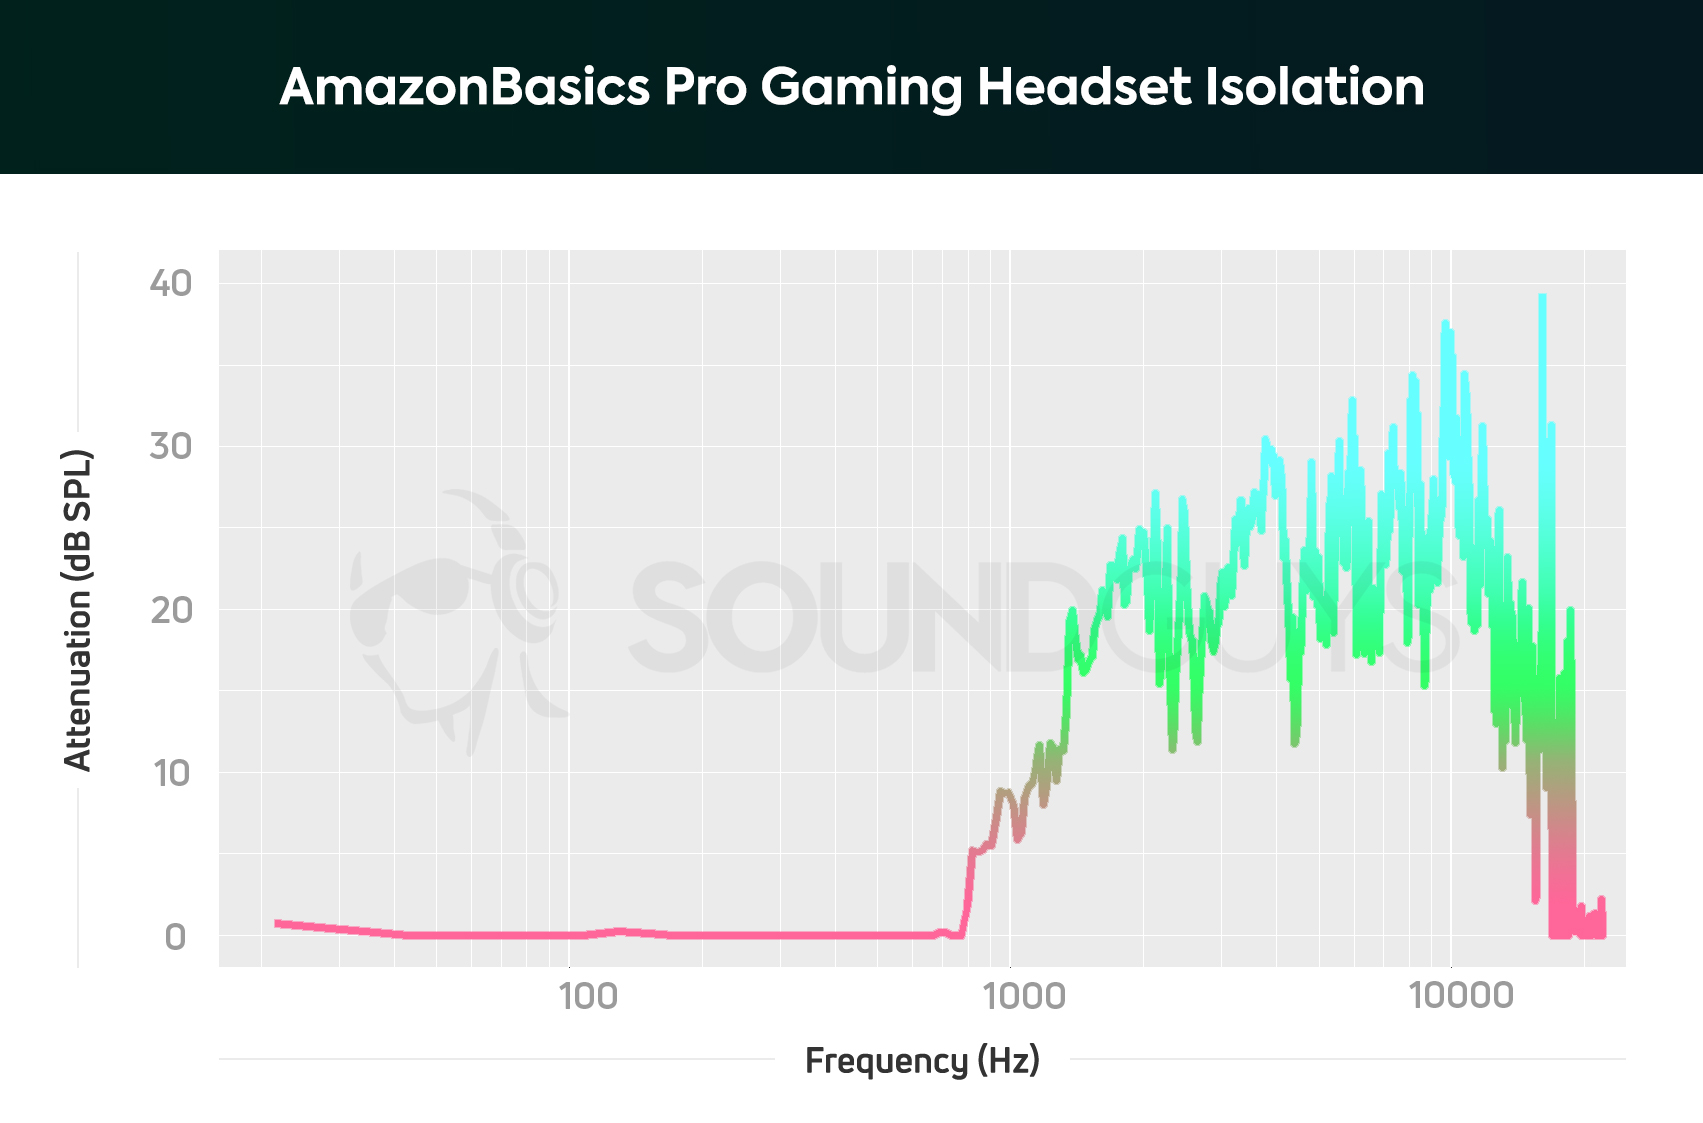 An isolation chart for the AmazonBasics Pro Gaming Headset.